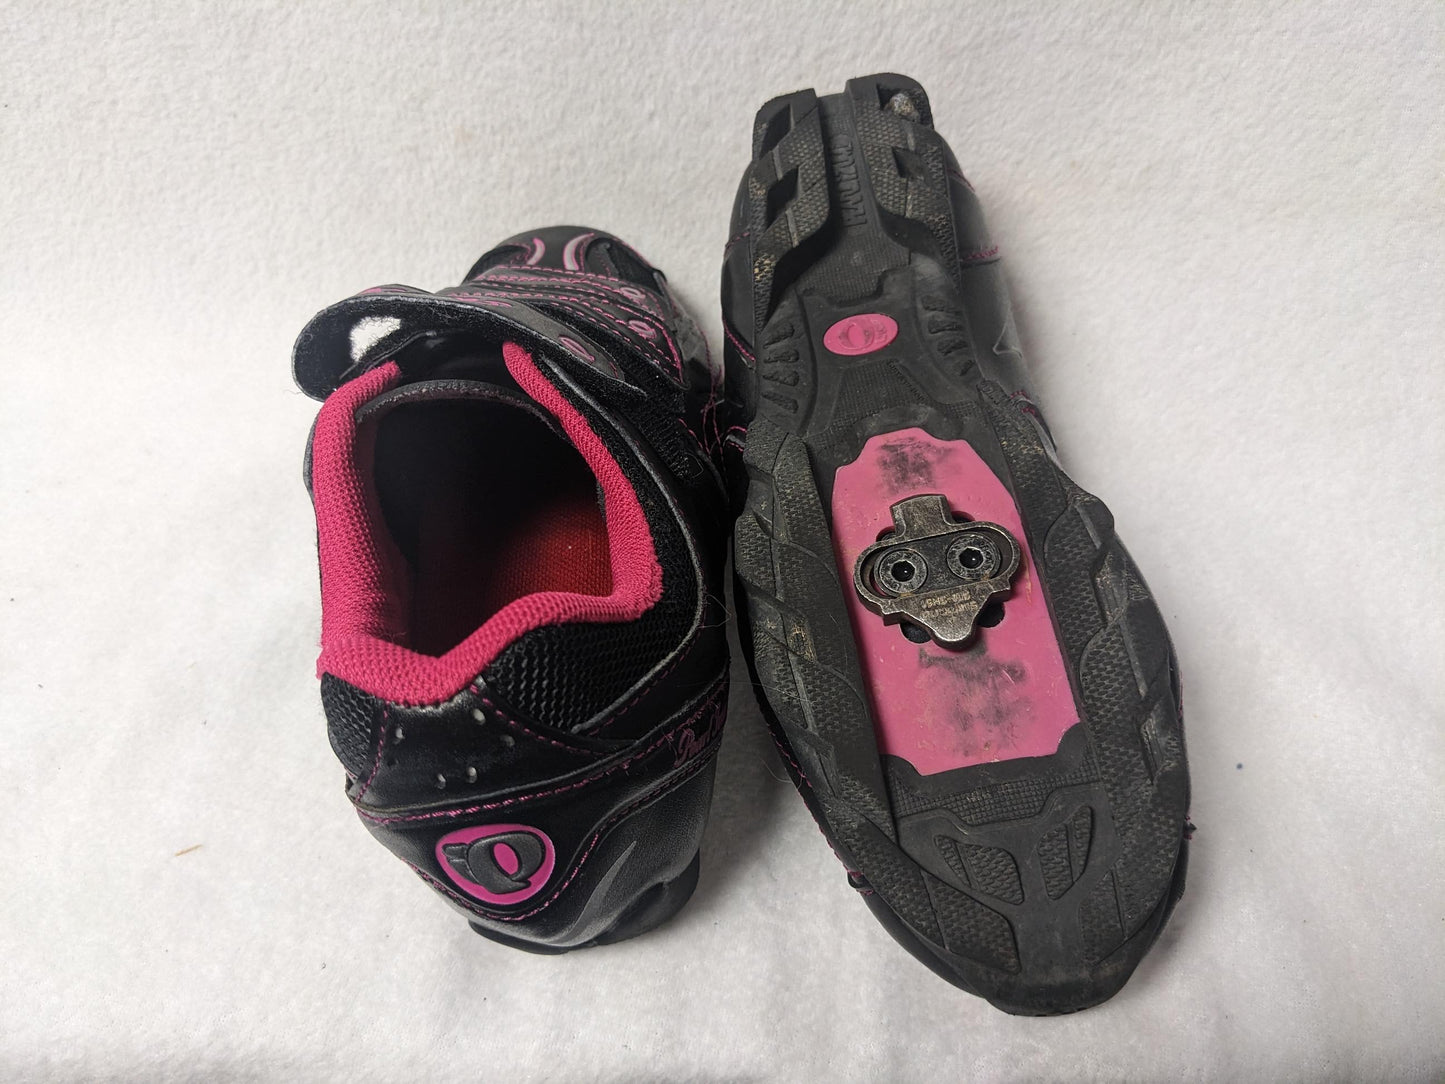 Pearl Izumi Women's Cycling Shoes Size Women 6.5 Color Black Condition Used